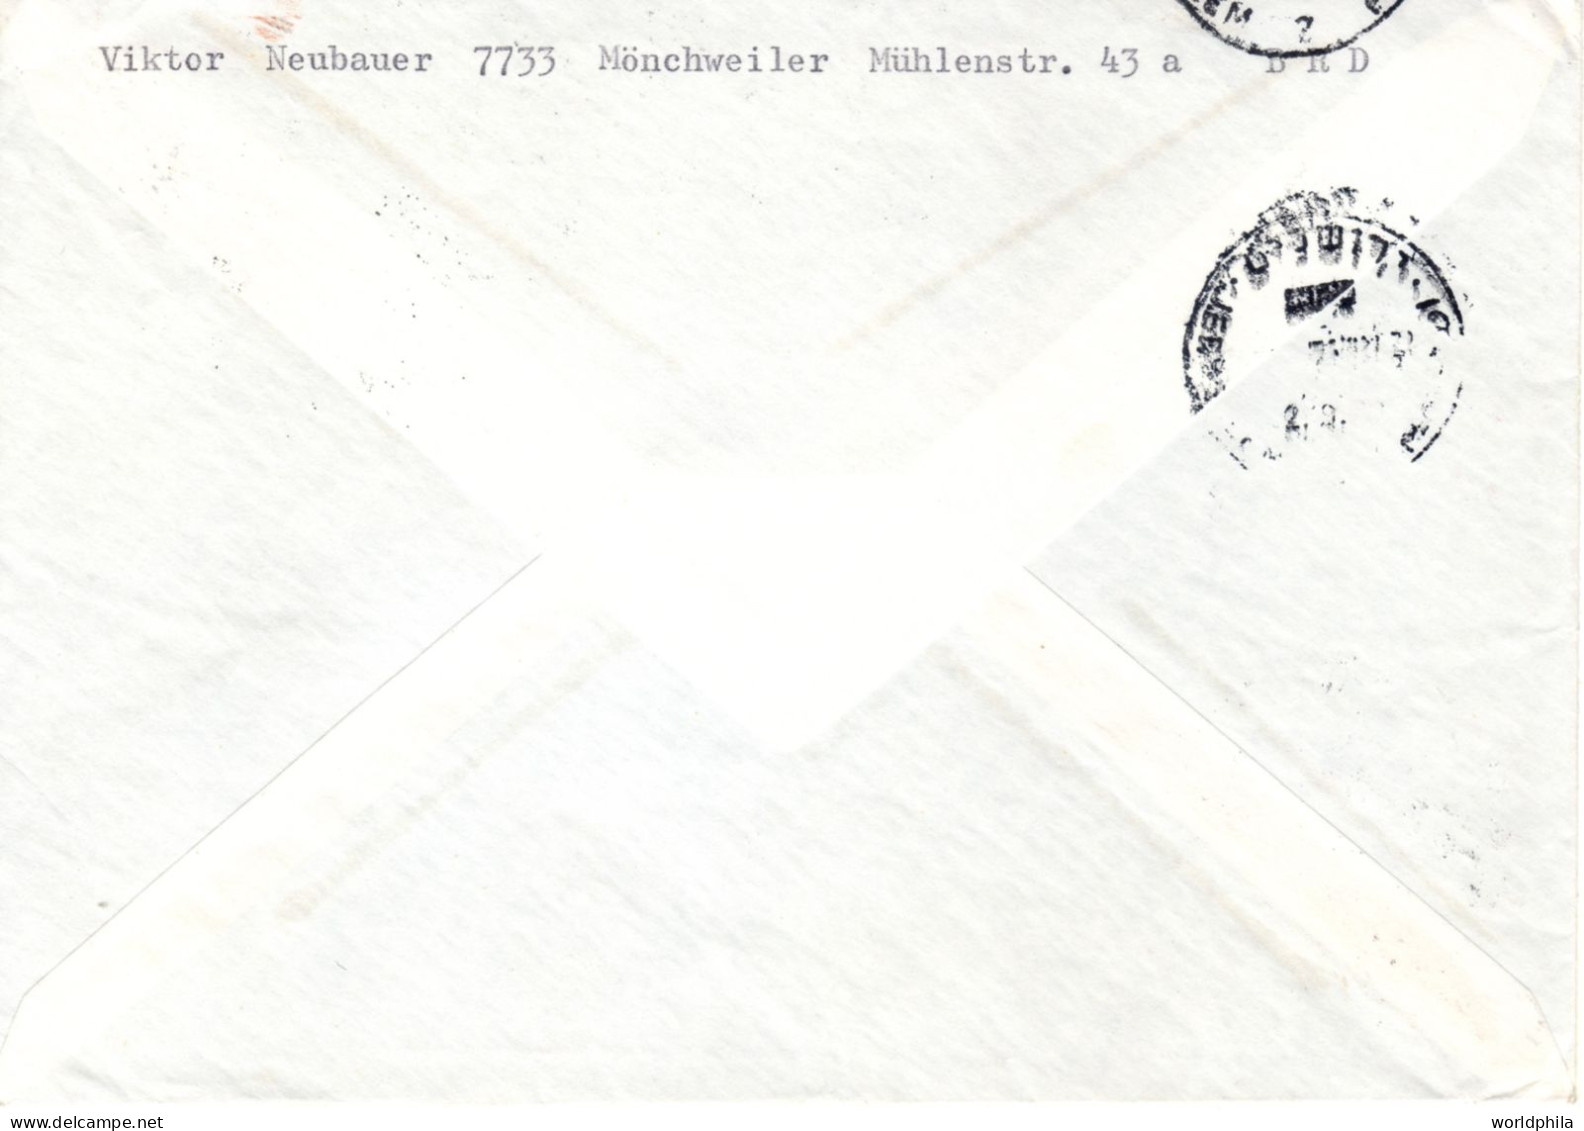 Deutschland To Israel 1972 Olympic Games Mi#624-7 Full Set Registered Mailed Cover IV - Ete 1972: Munich